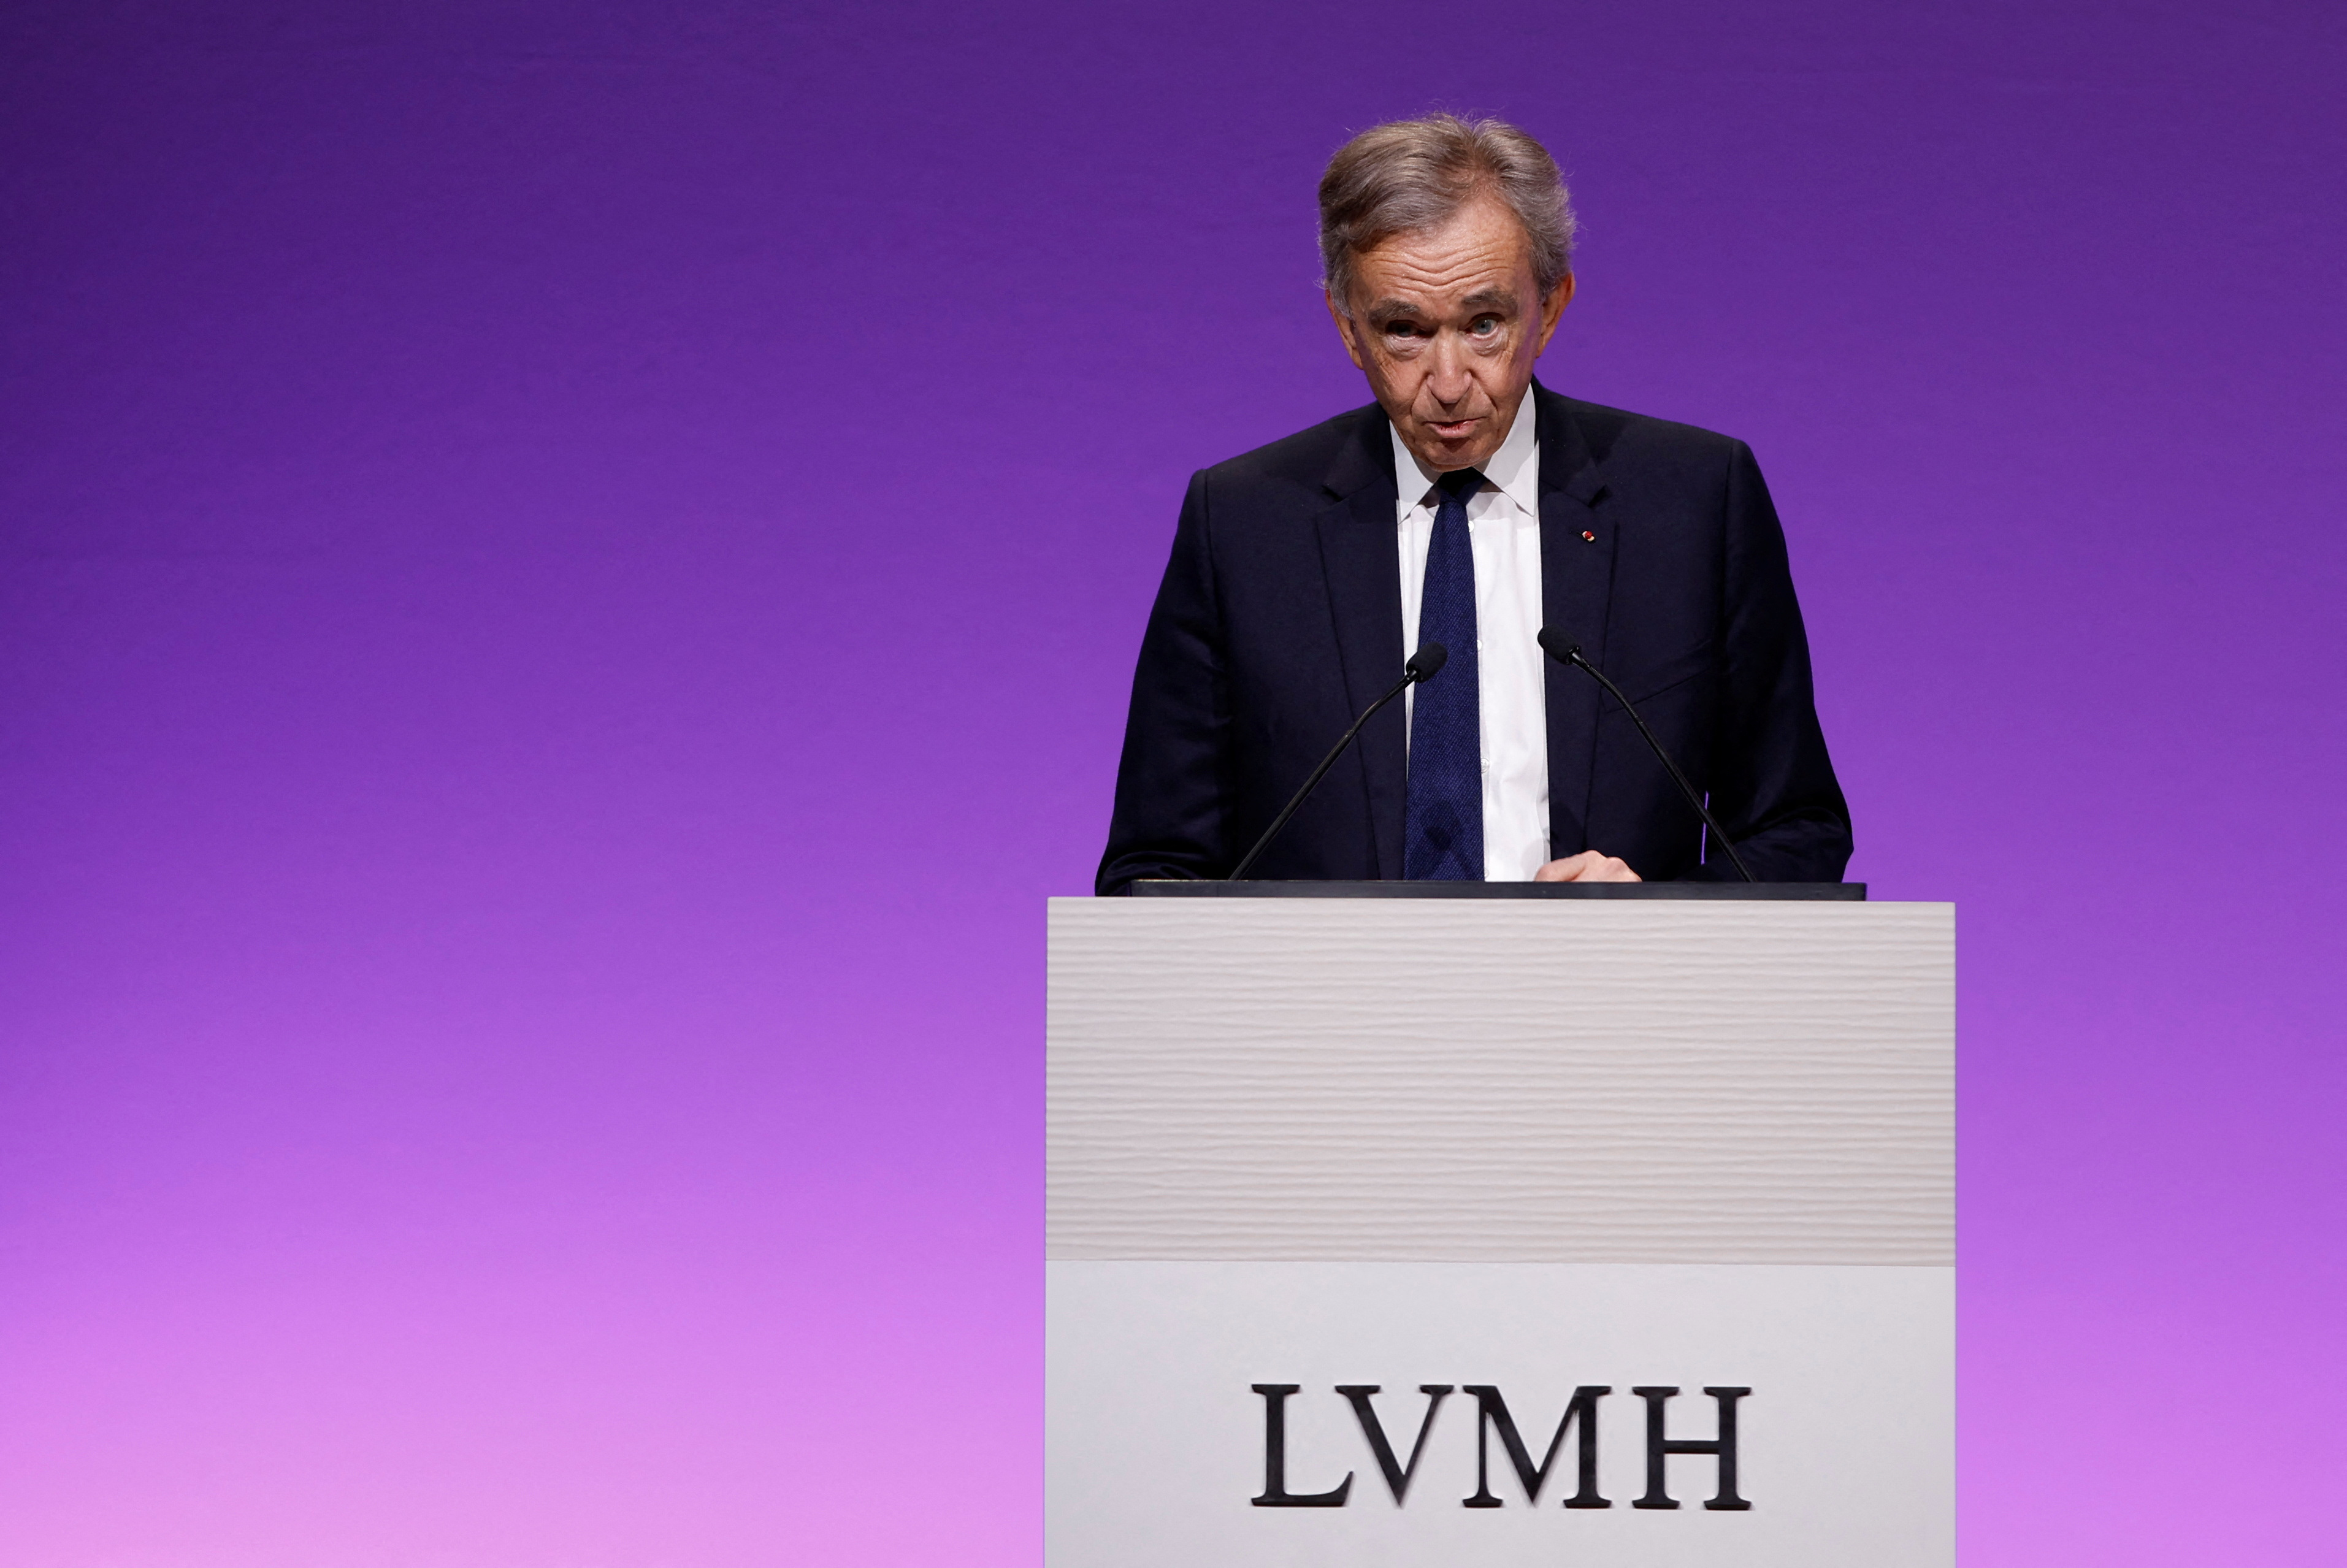 LVMH luxury group presents full year results in Paris